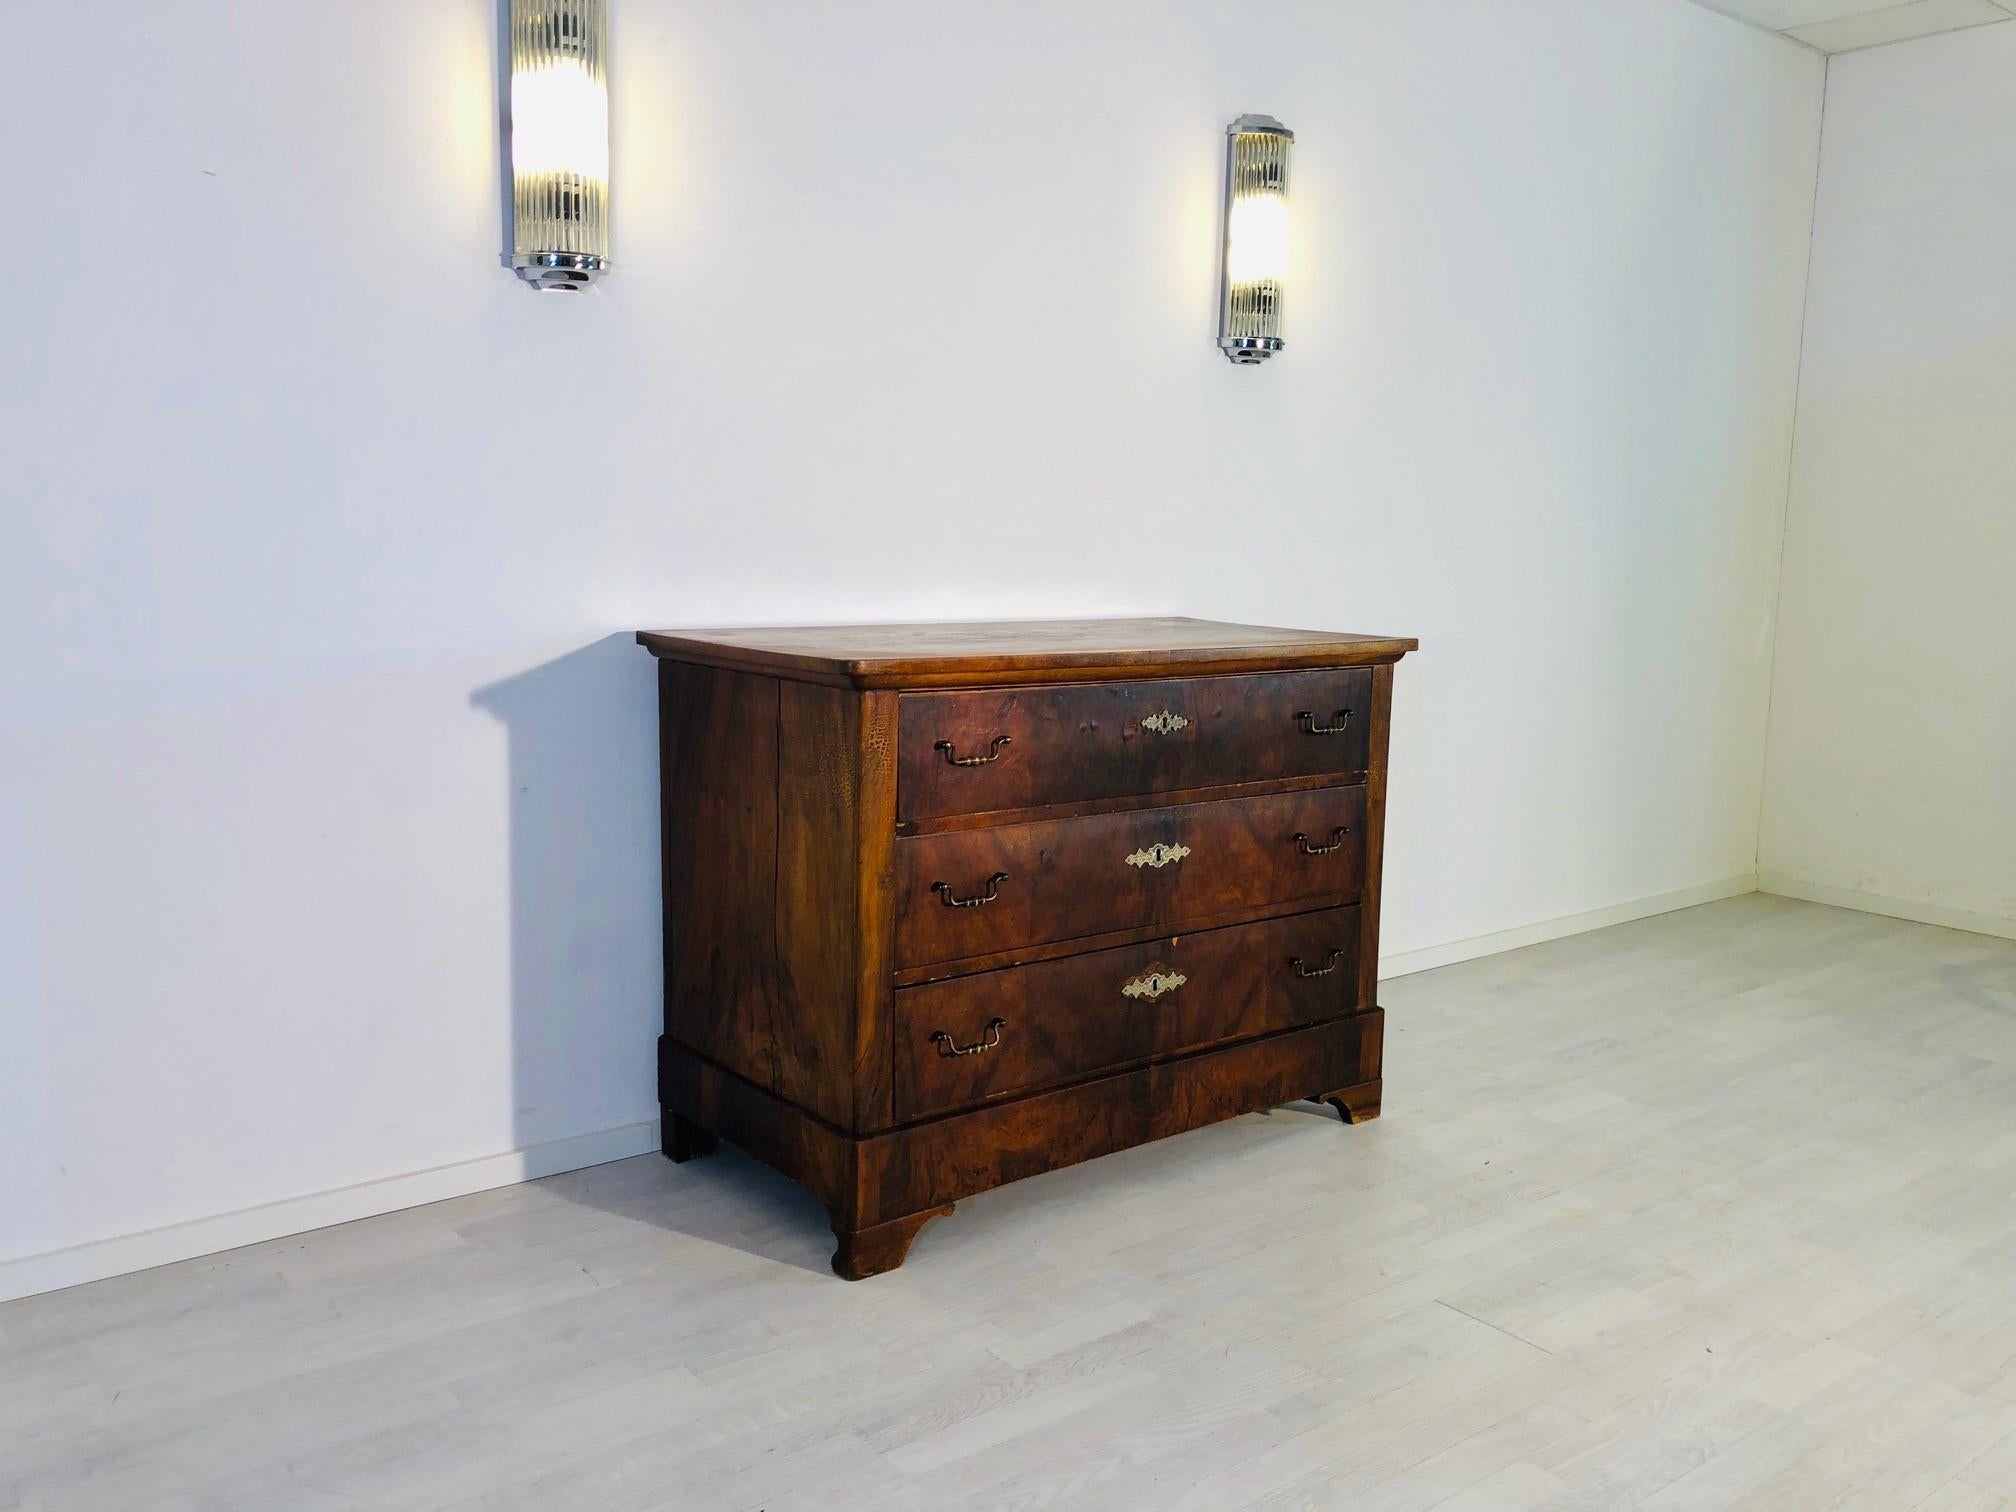 Original antique Biedermeier commode from a German castle, build in the 1850s. It convinces with its classic design, the dark brown walnut veneer and original key plates and handles made of brass. The item is currently under restoration and will be